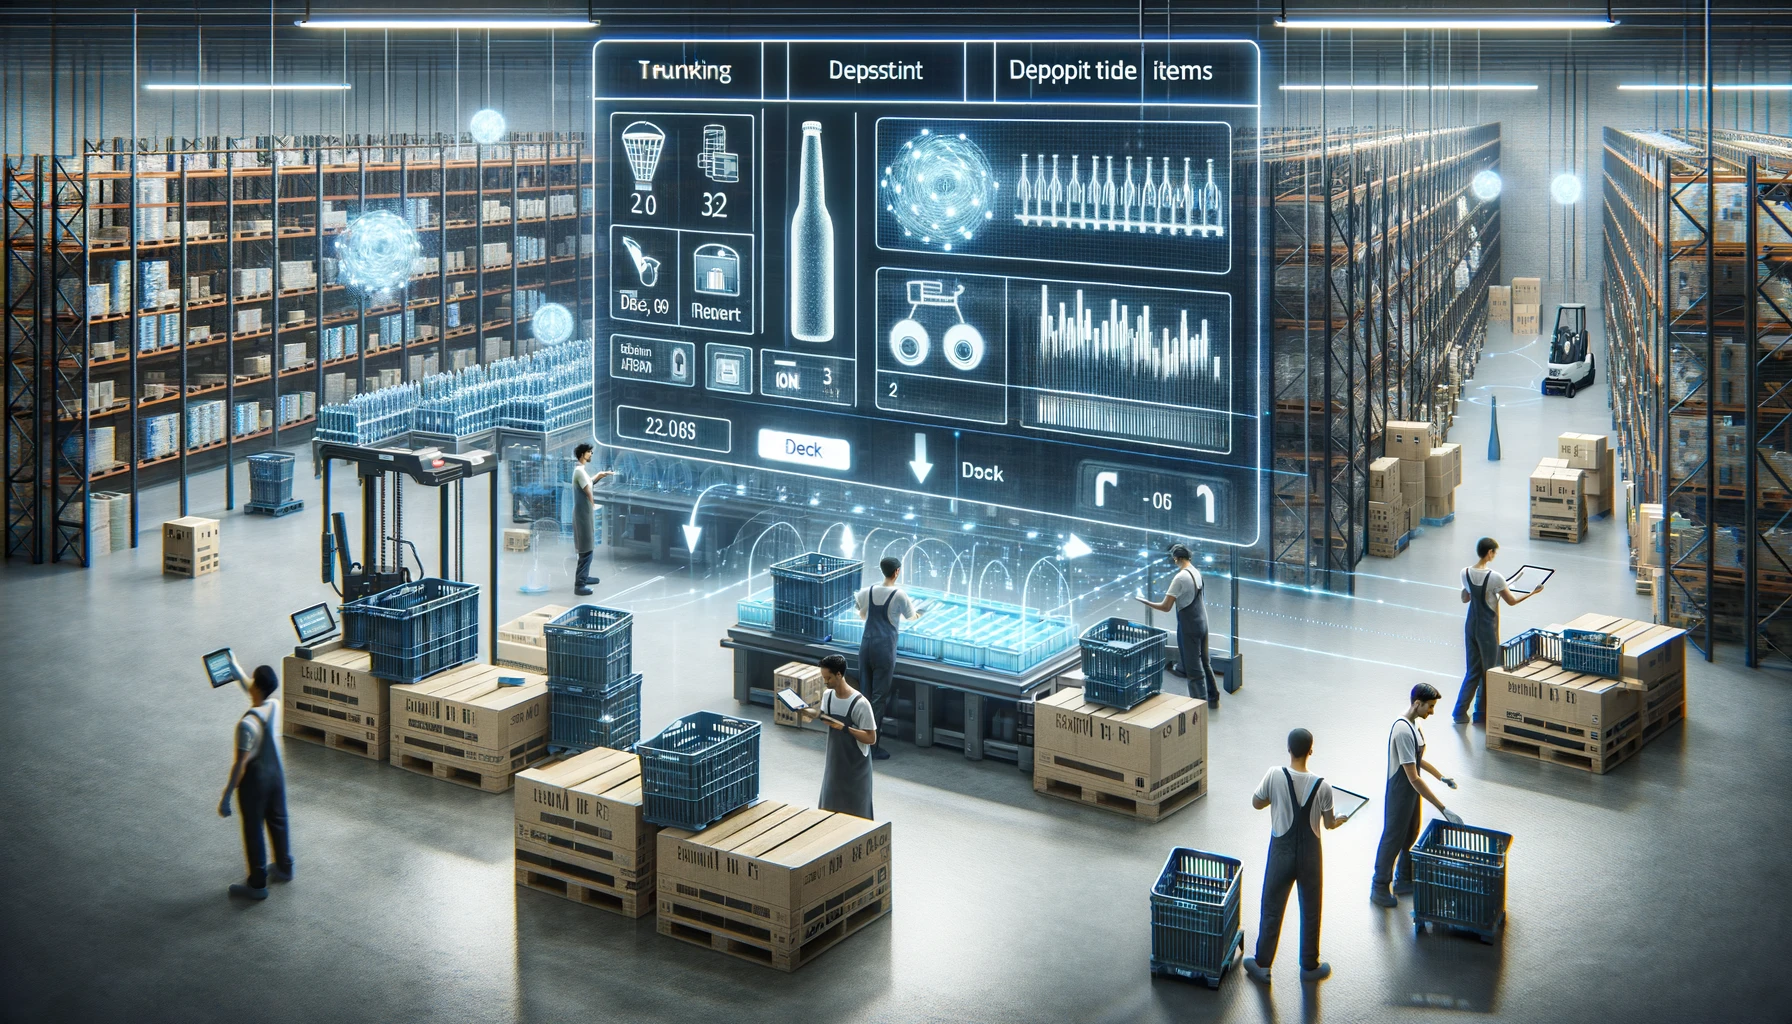 DALL·E 2024-04-15 09.30.08 - An organized warehouse scene showing the management of deposit items. The image features workers scanning and sorting deposit-returnable items like be